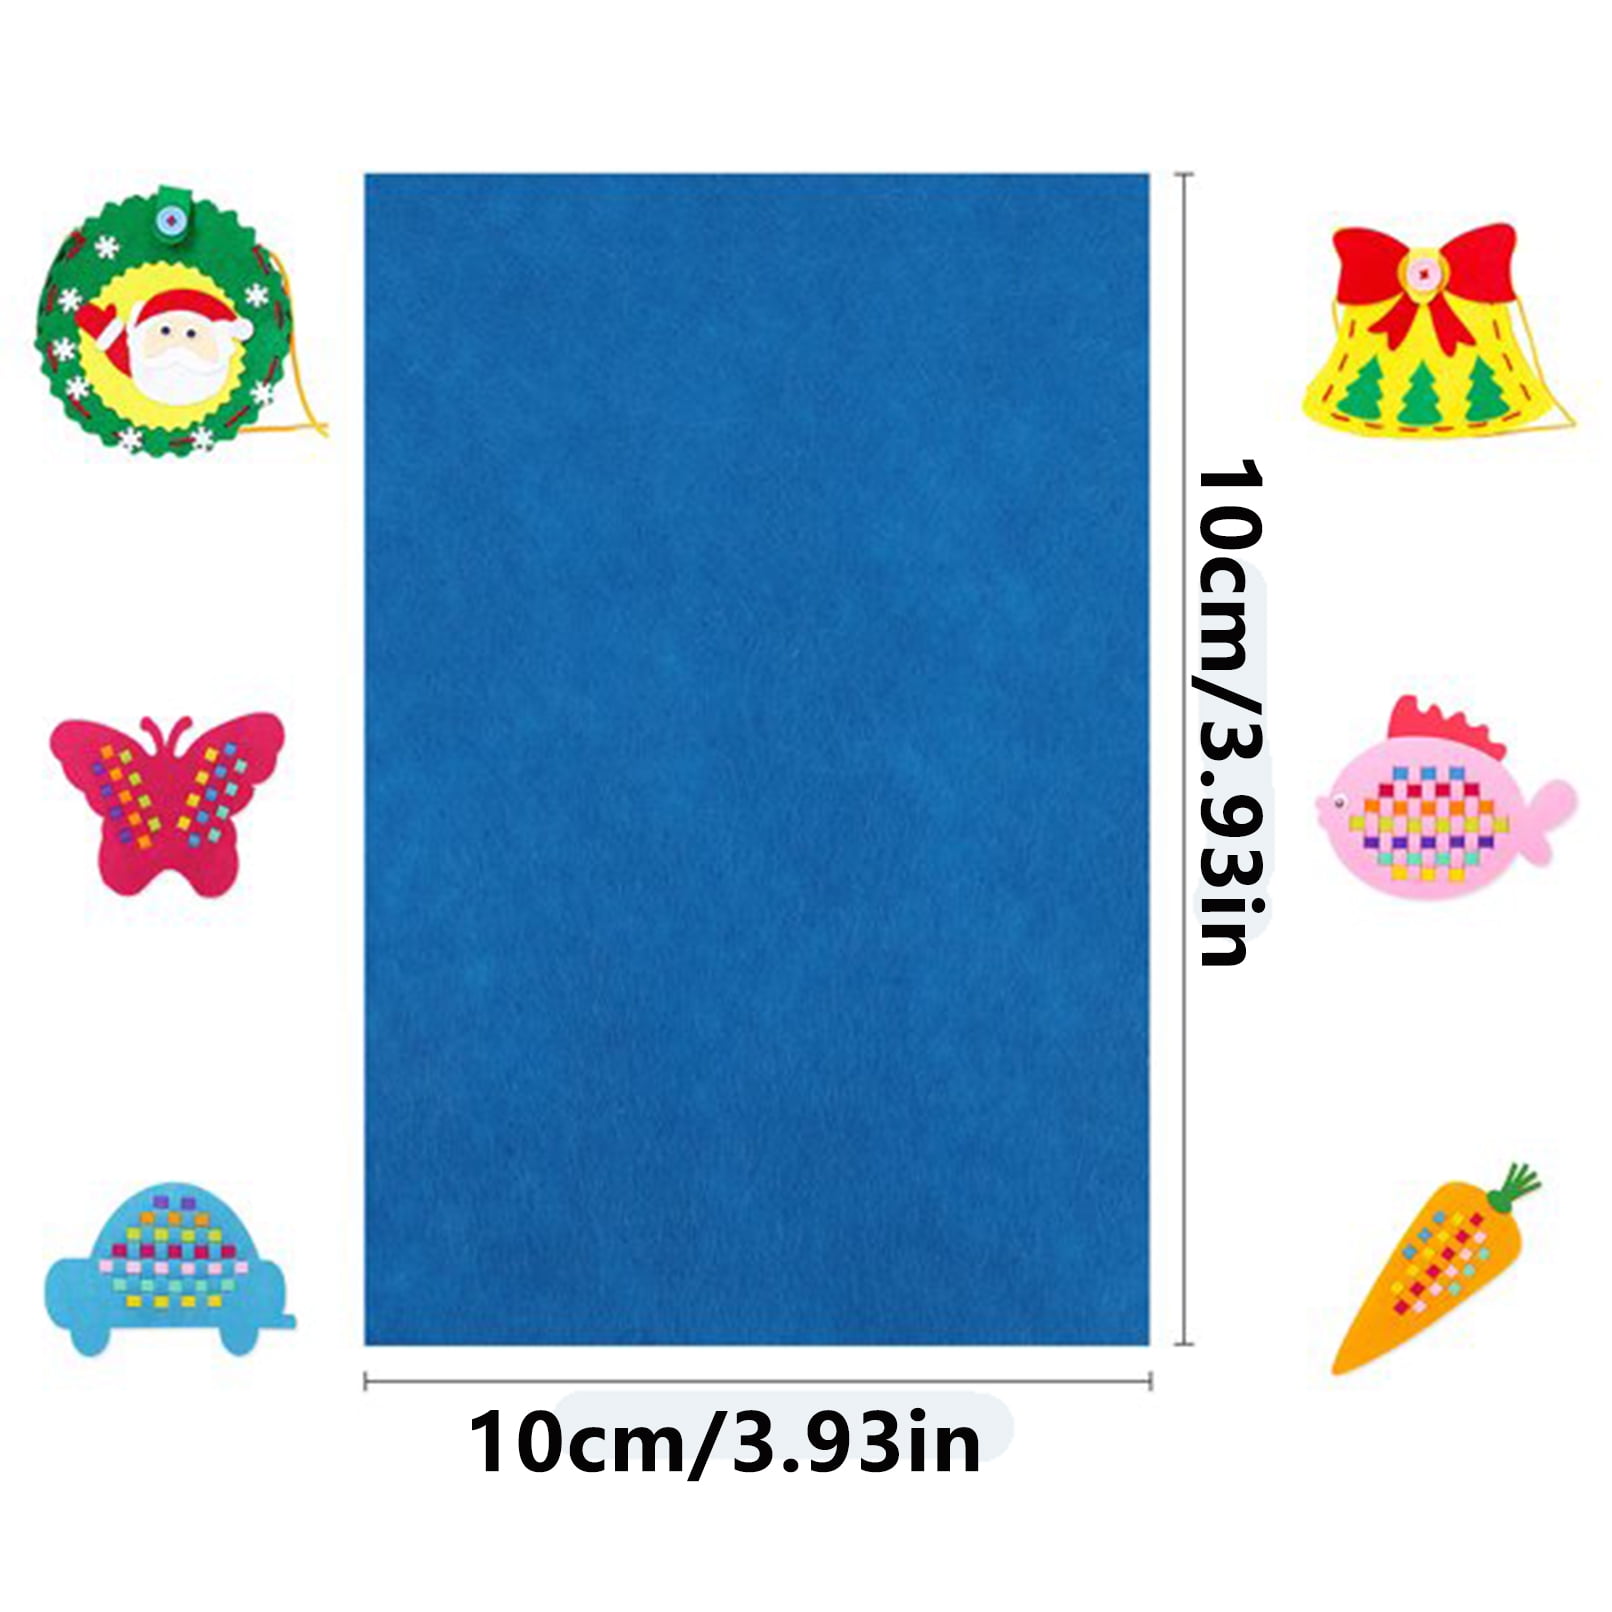 40 Pcs 4x6 Craft Felt Fabric Sheets,Assorted Colors Non Woven Felt  Sheets,Thick Felt Fabric Square for DIY Sewing Crafts,Patchwork,  Decoration. 